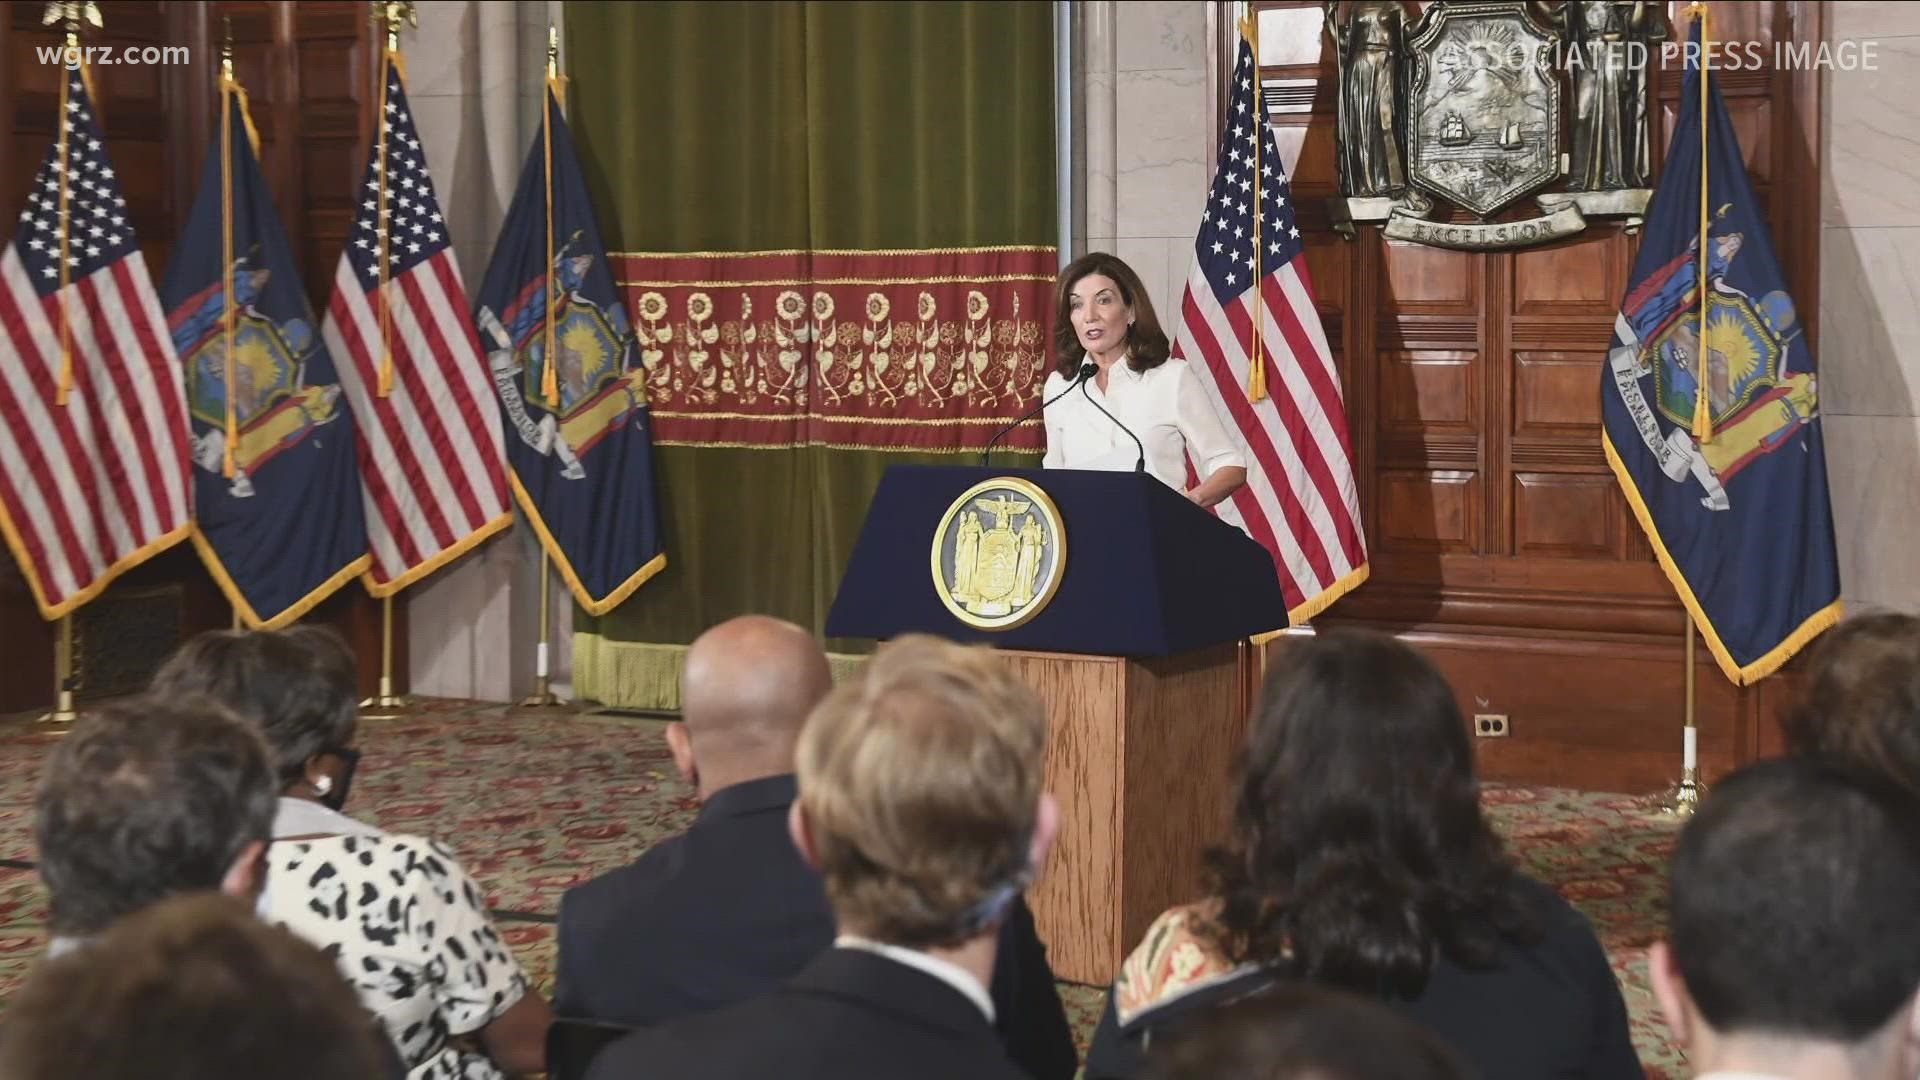 Hochul is the first New York governor in modern political history to have come with a background serving local government.